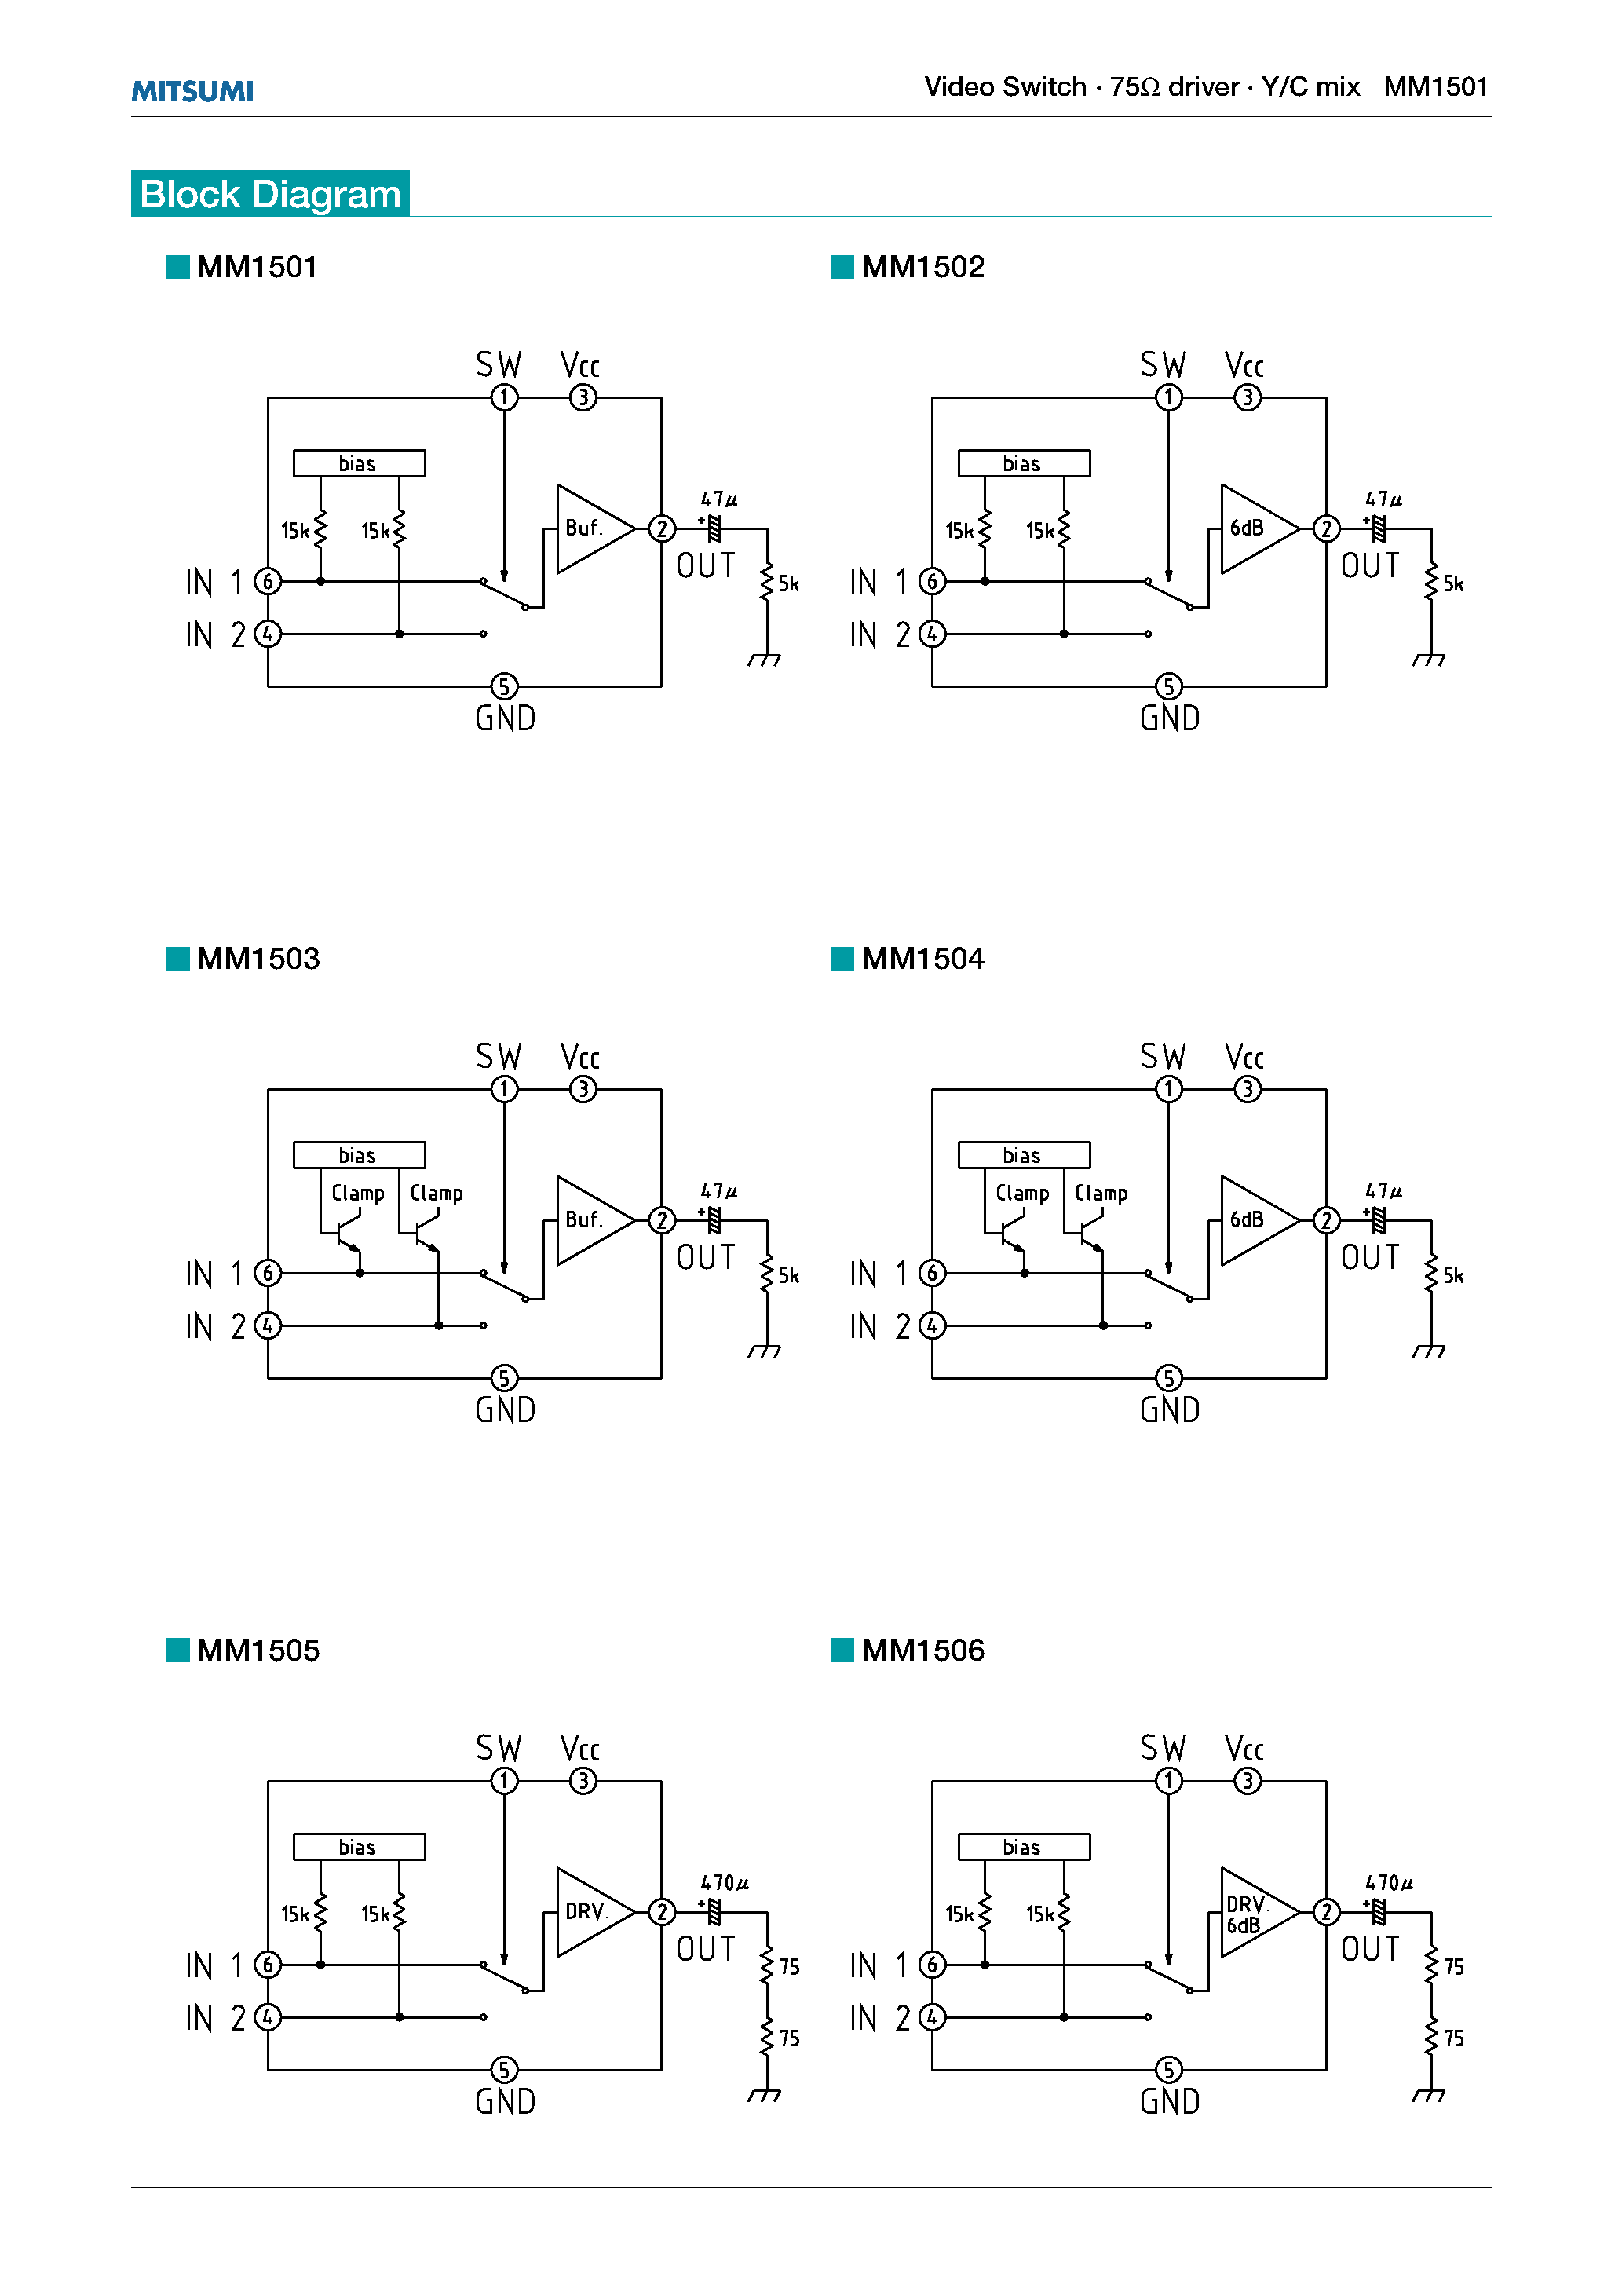 Datasheet MM1506 - Video Switch 75 driver Y/C mix page 2